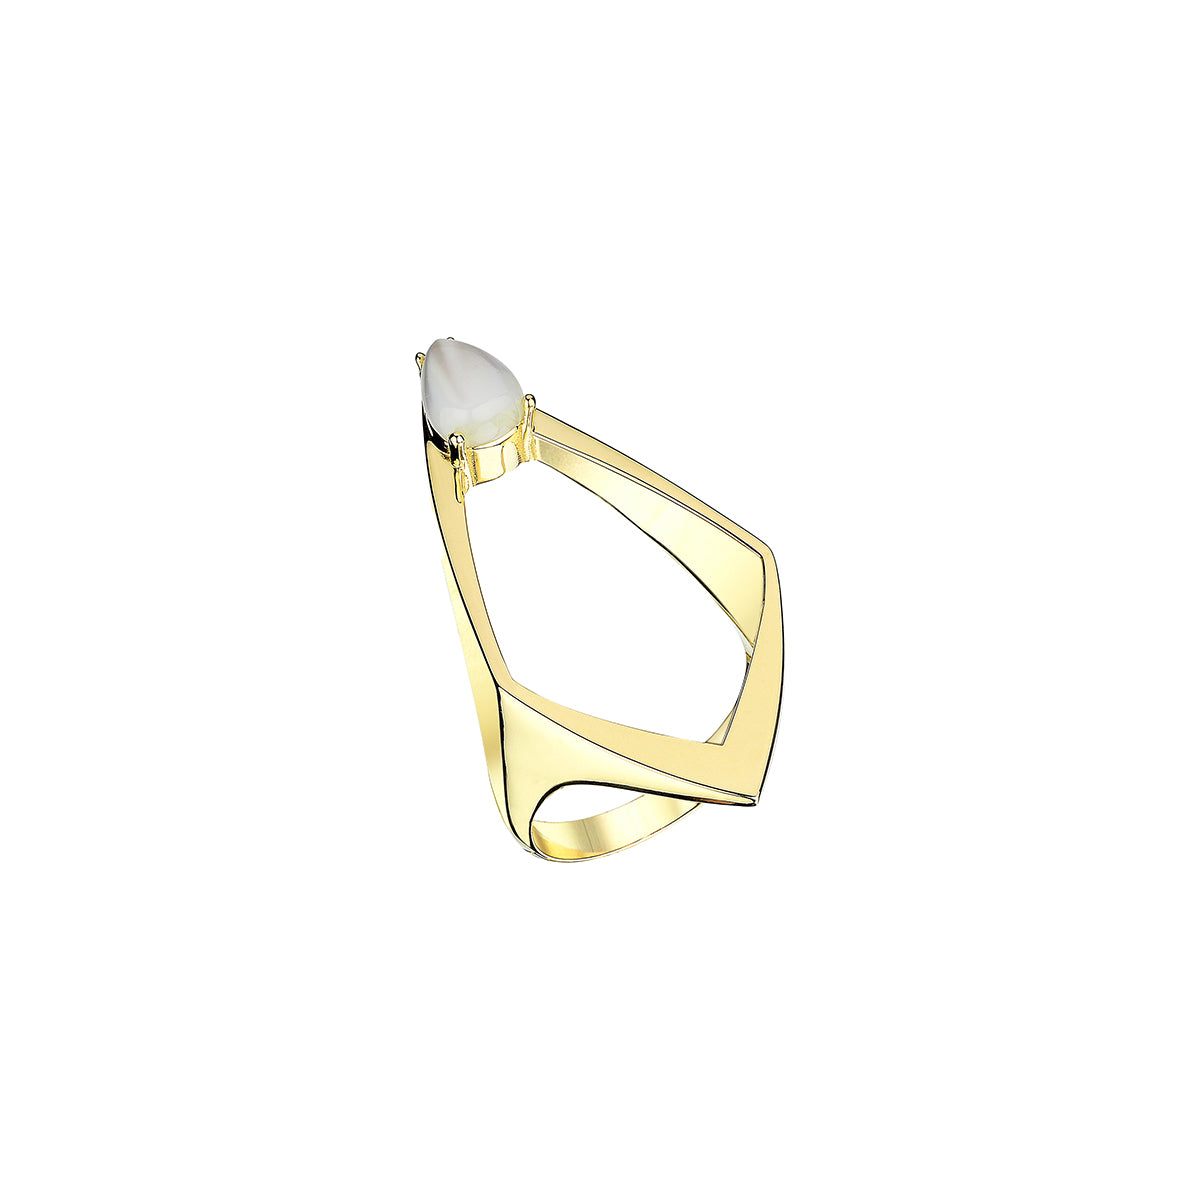 Tower Of Light Ring in Yellow Gold - Her Story Shop